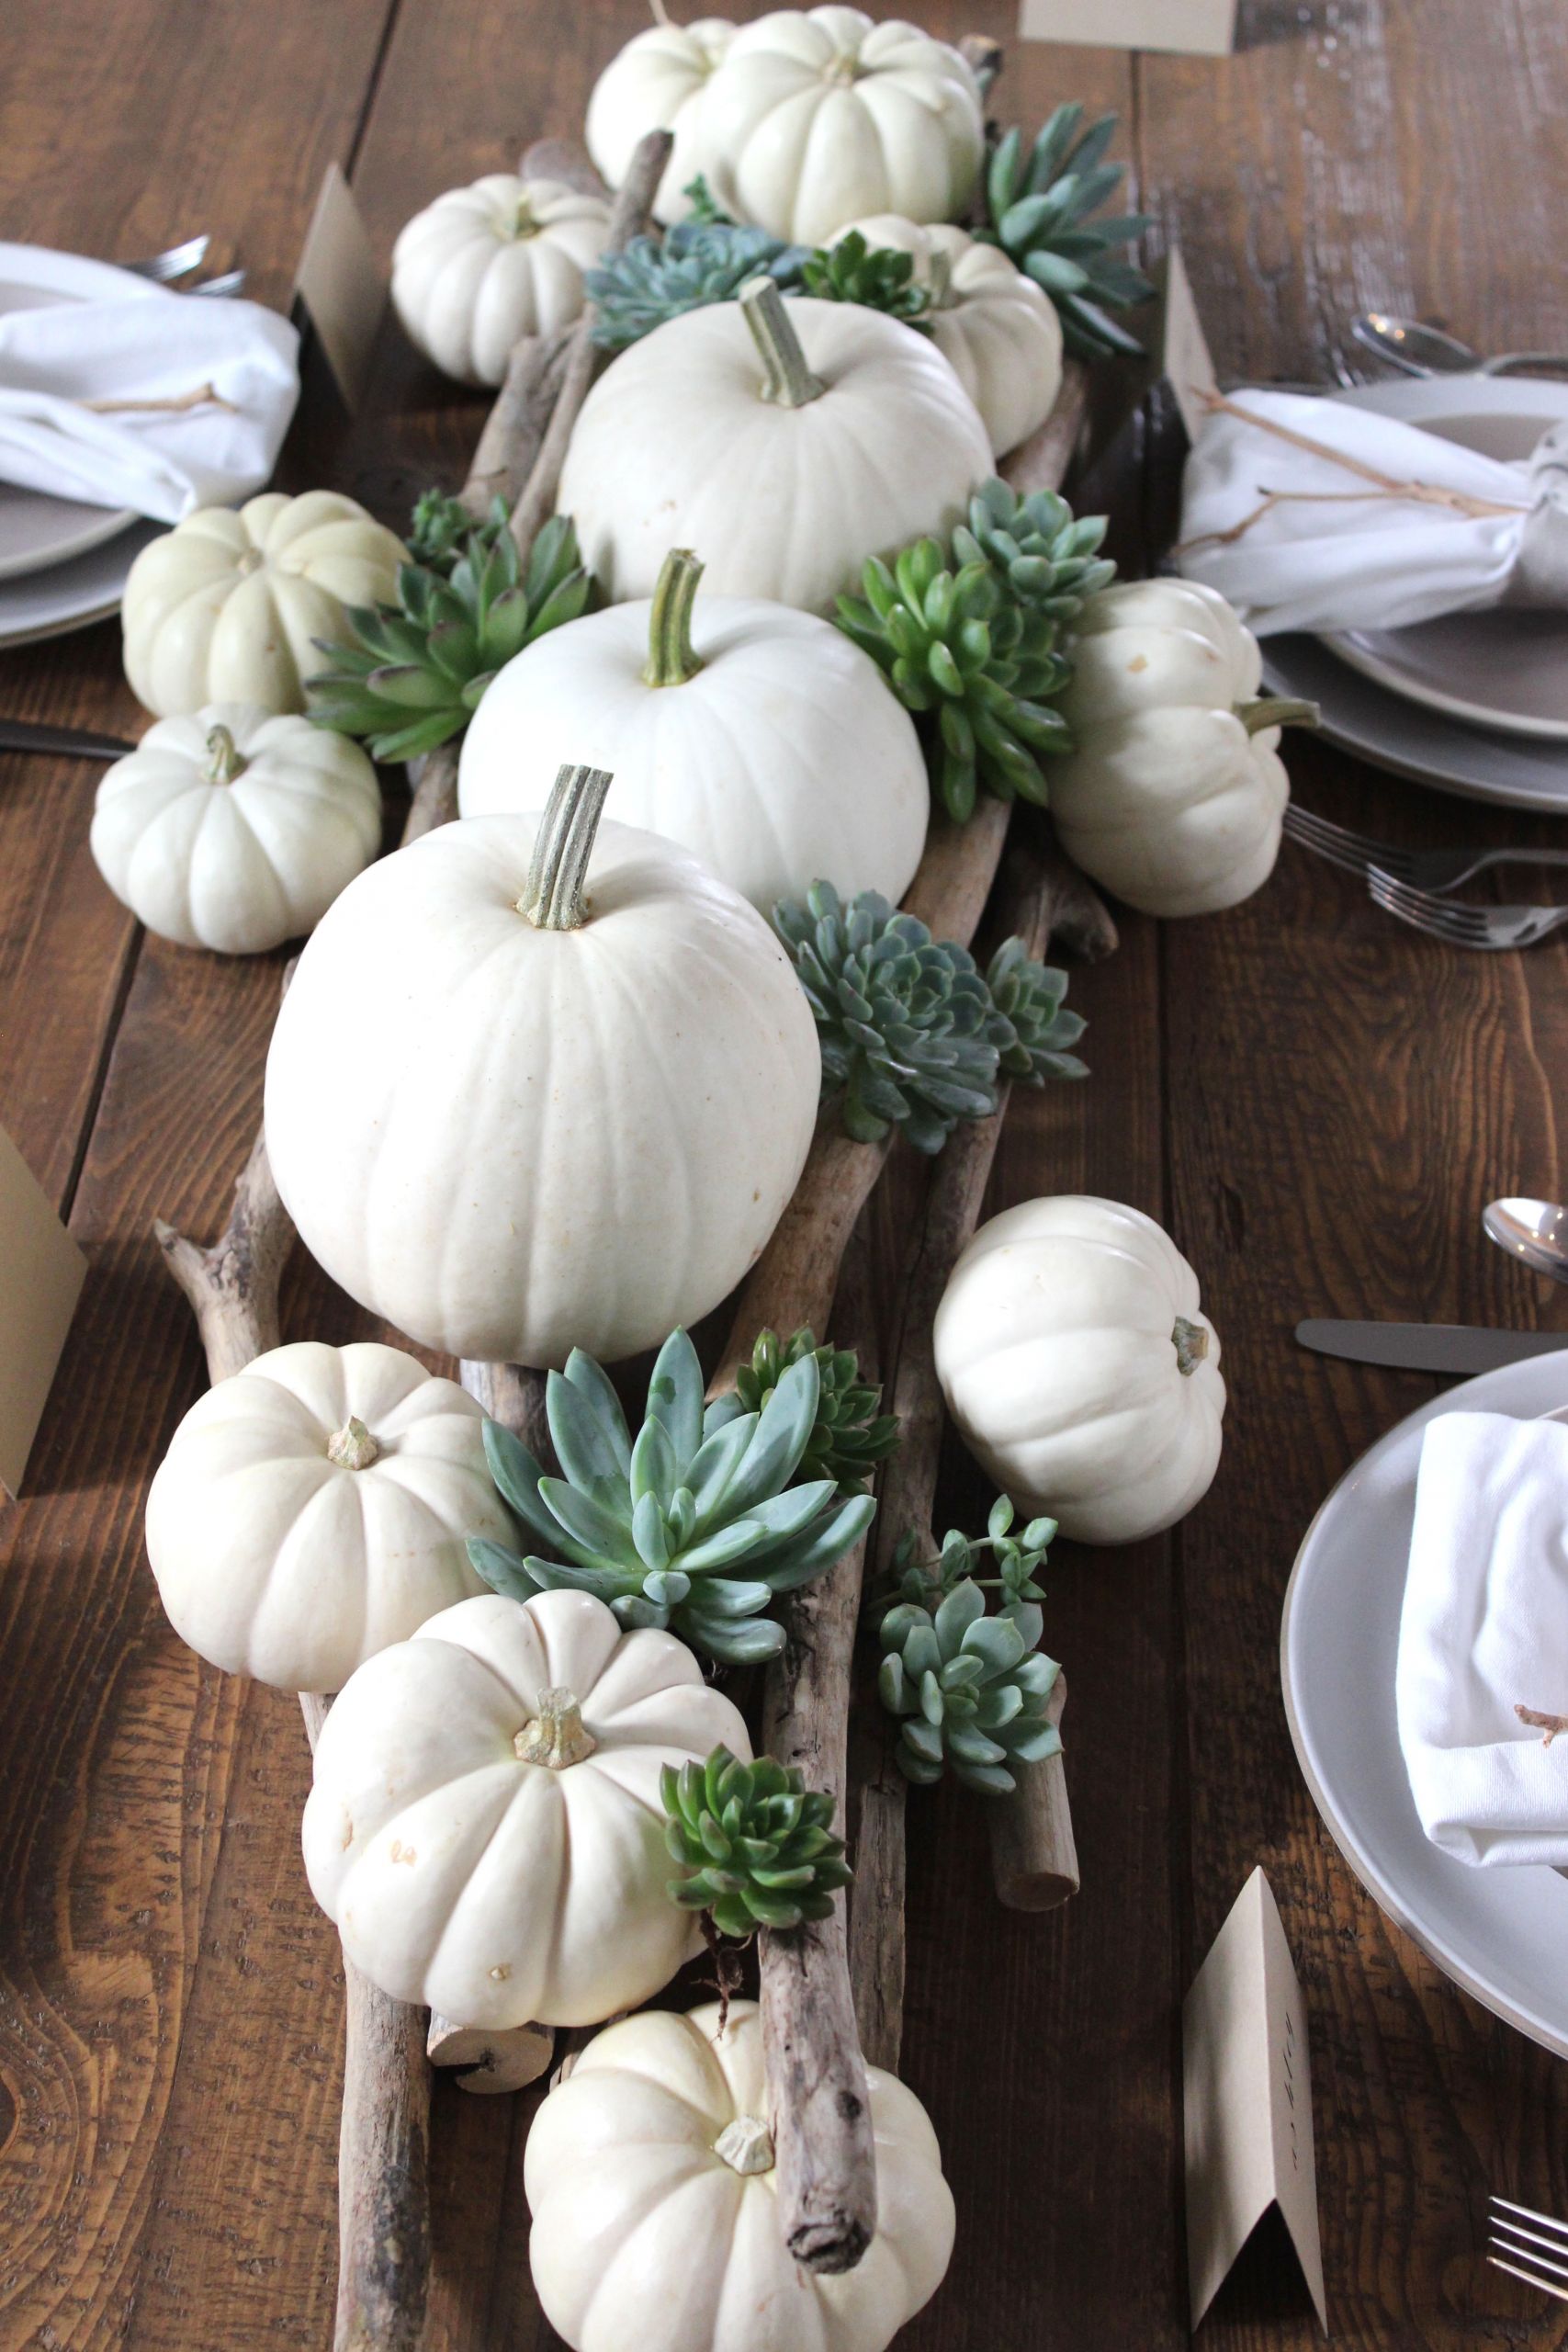 Rustic Thanksgiving Decor
 setting a rustic Thanksgiving table